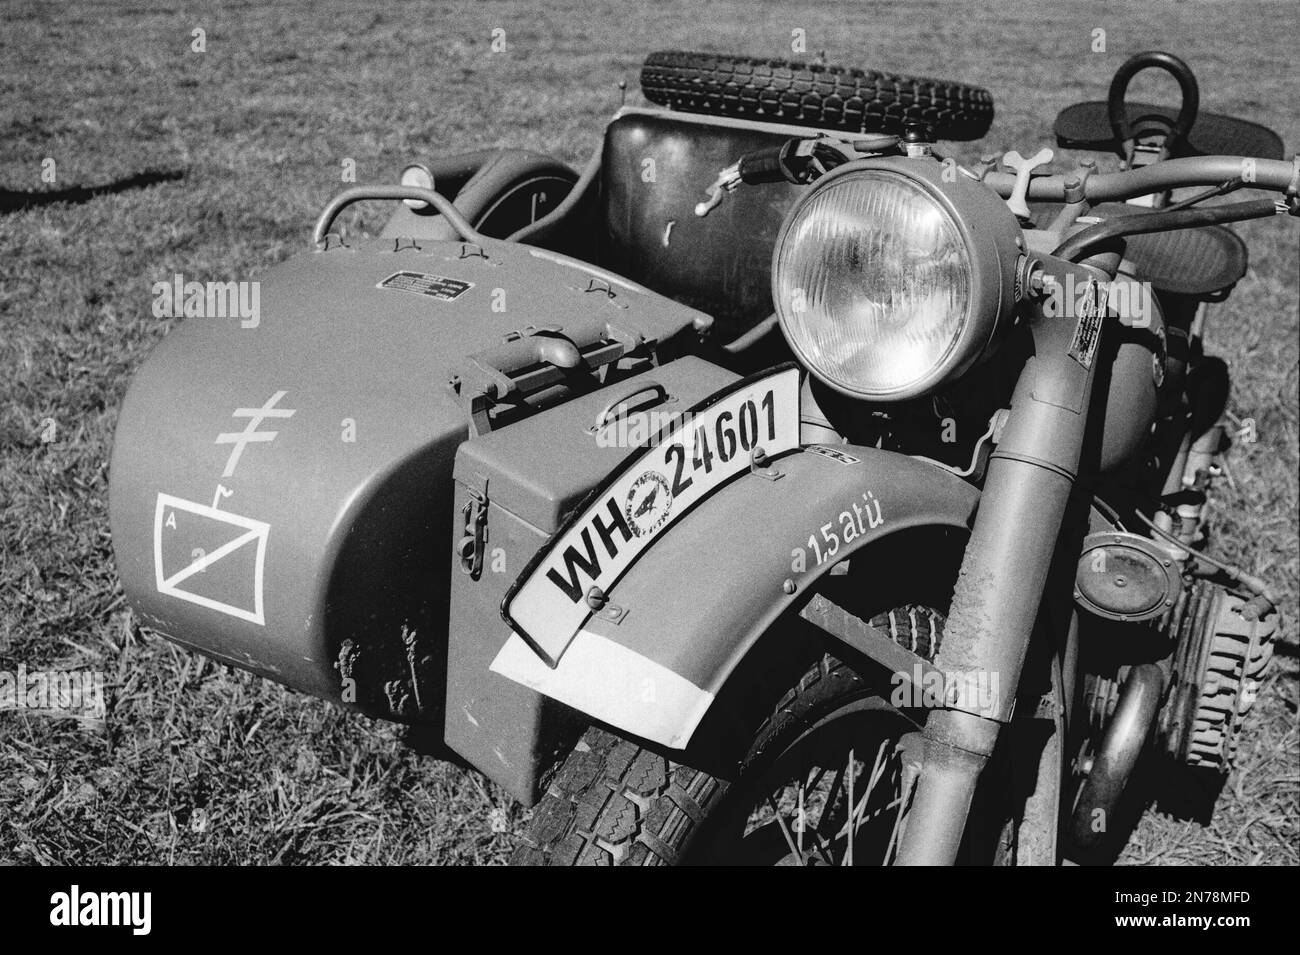 WWII BMW motorcycle parked at a camp in a field during a reenactment at the American Heritage Museum. The image was captured on analog black and white Stock Photo